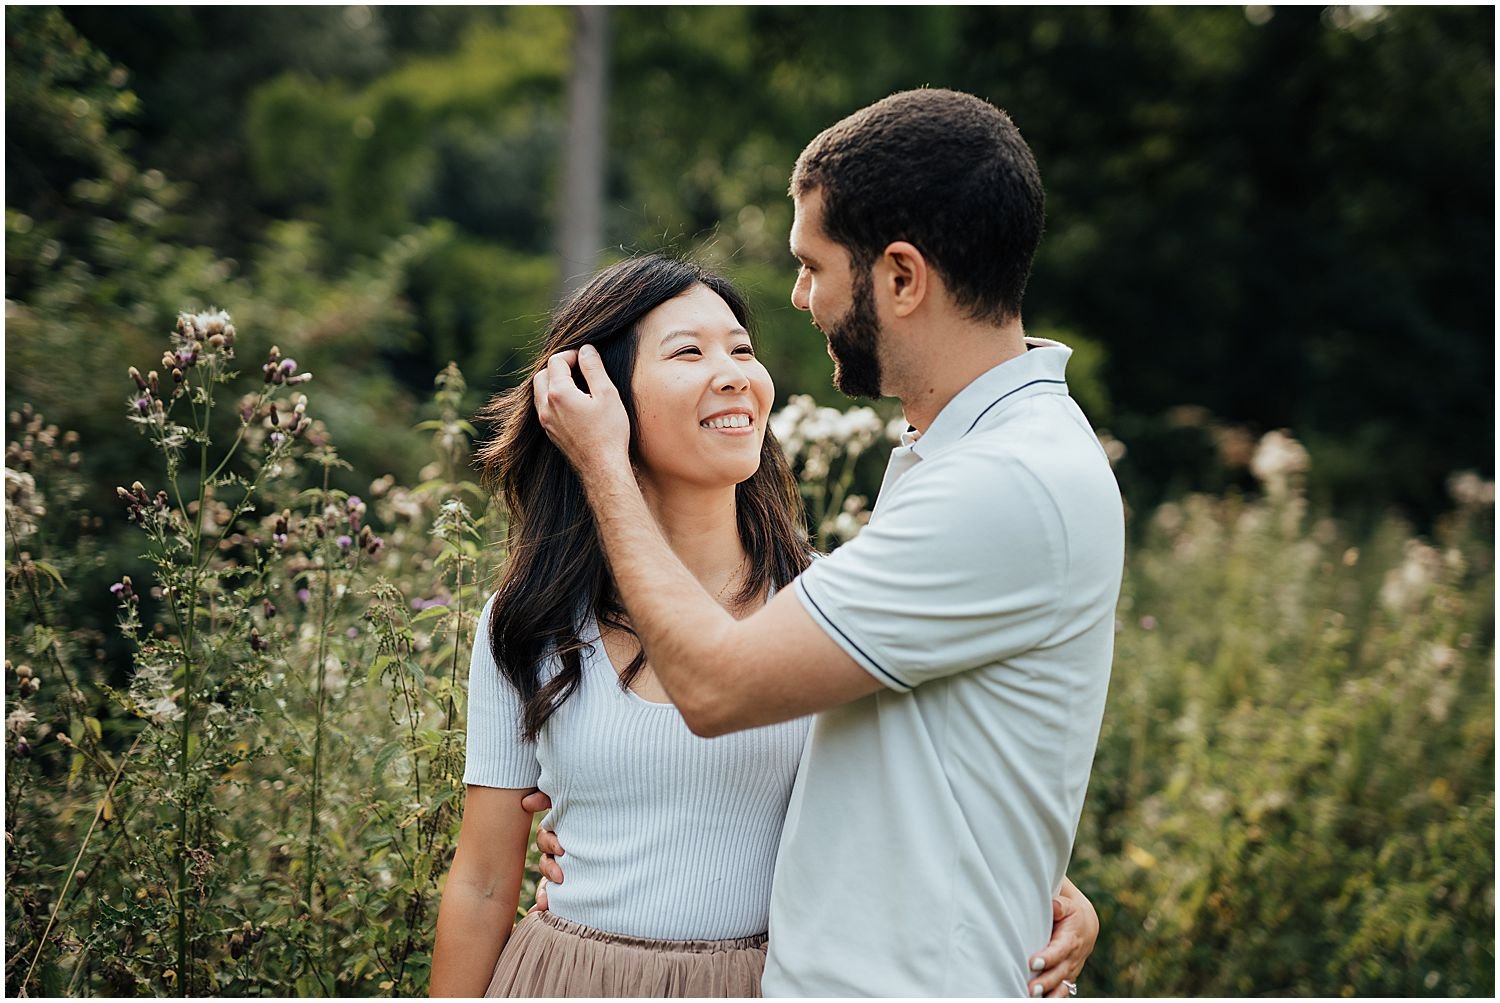 Romantic engagement session on a summer's evening in Hampstead Heath, London 